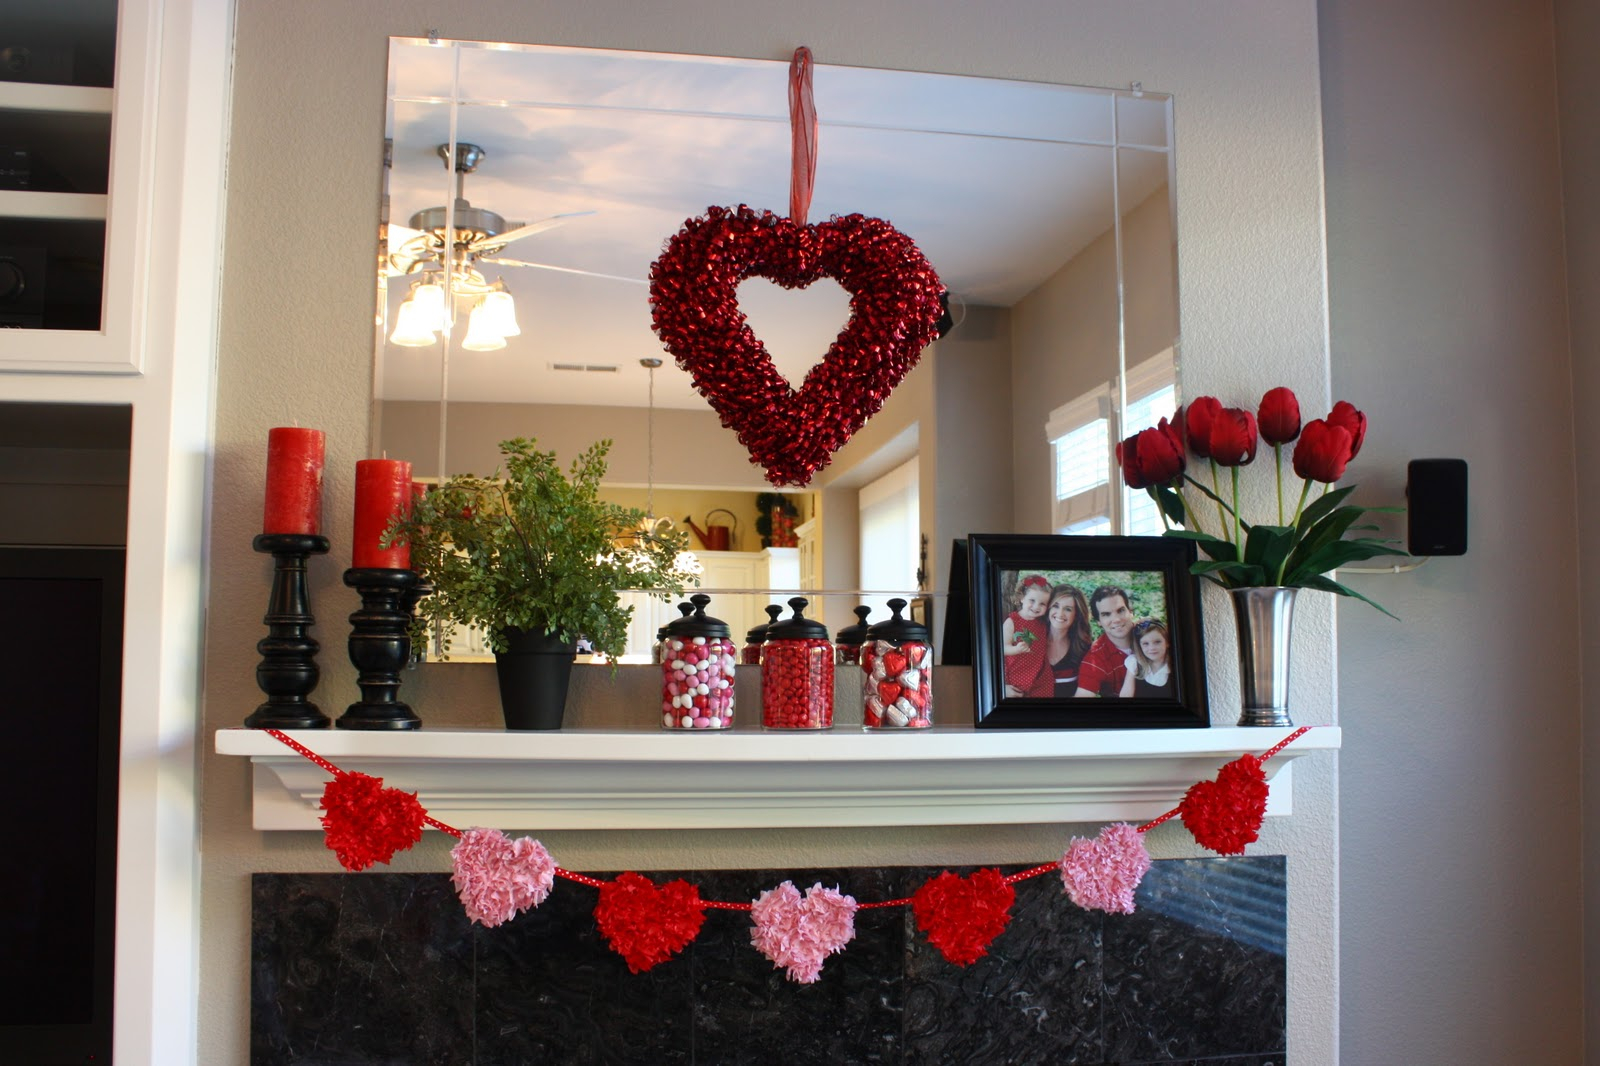 Take How To Decorate For January And February